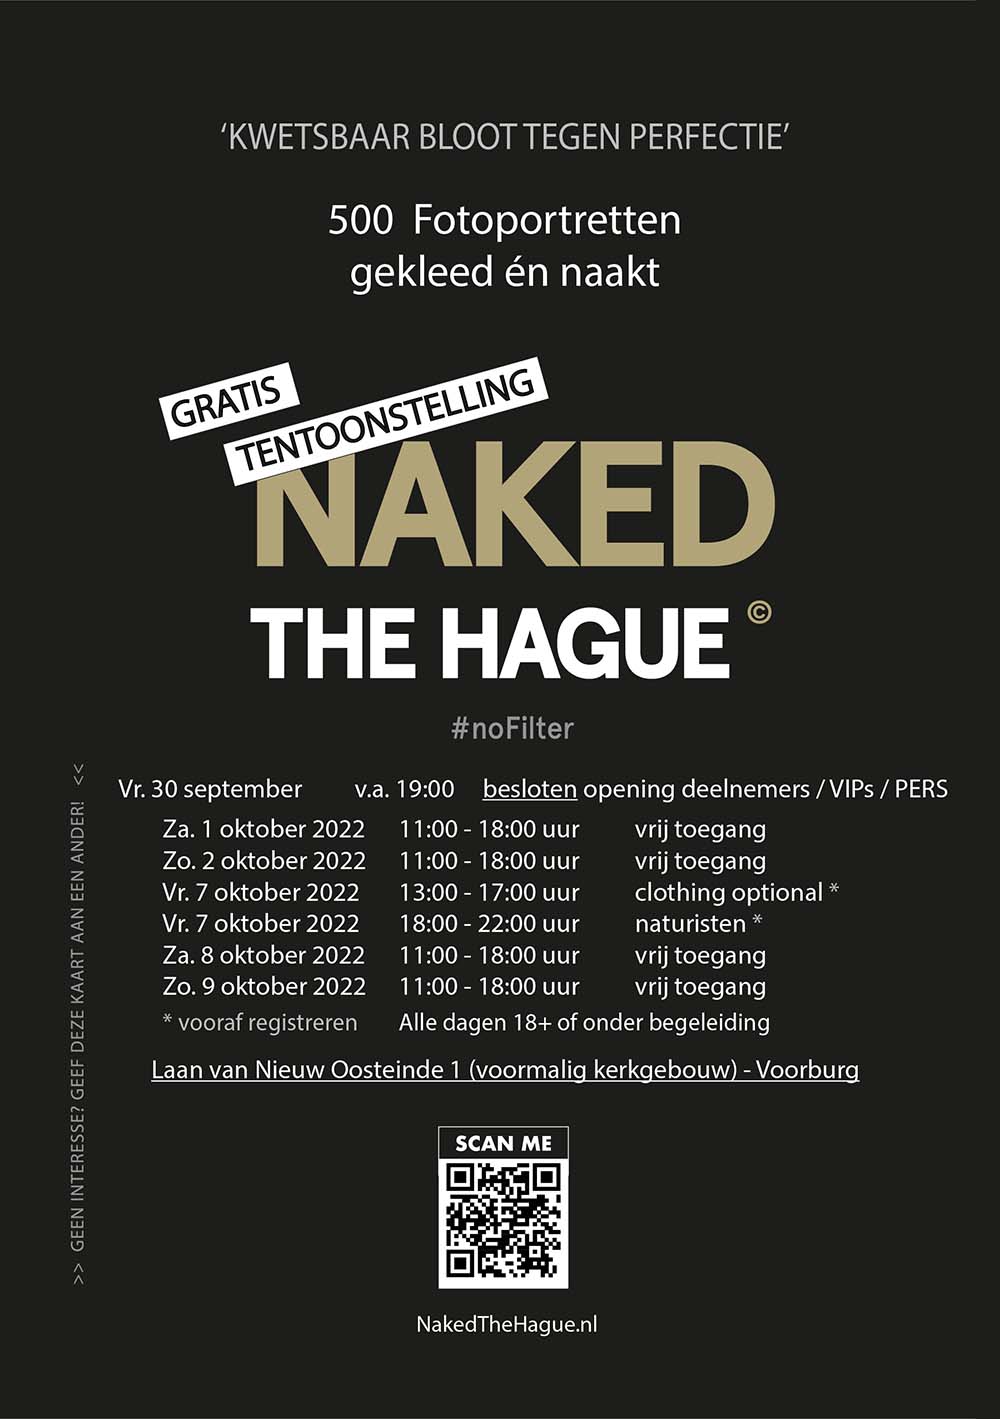 Naked The Hague tentoonstelling